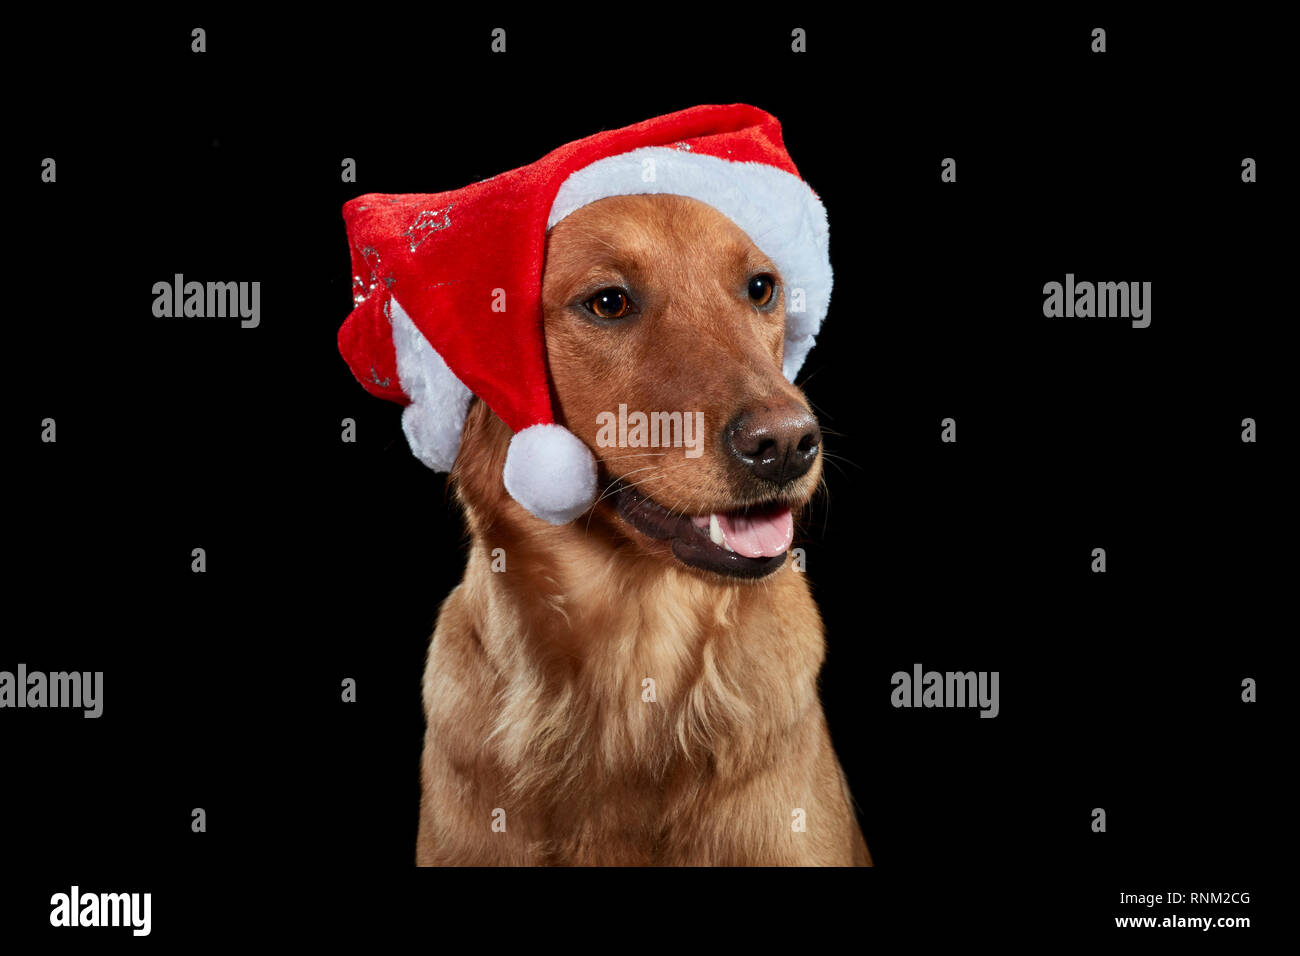 Golden Retriever. Portrait of adult dog against a black background, wearing Santa Claus hat. Germany Stock Photo